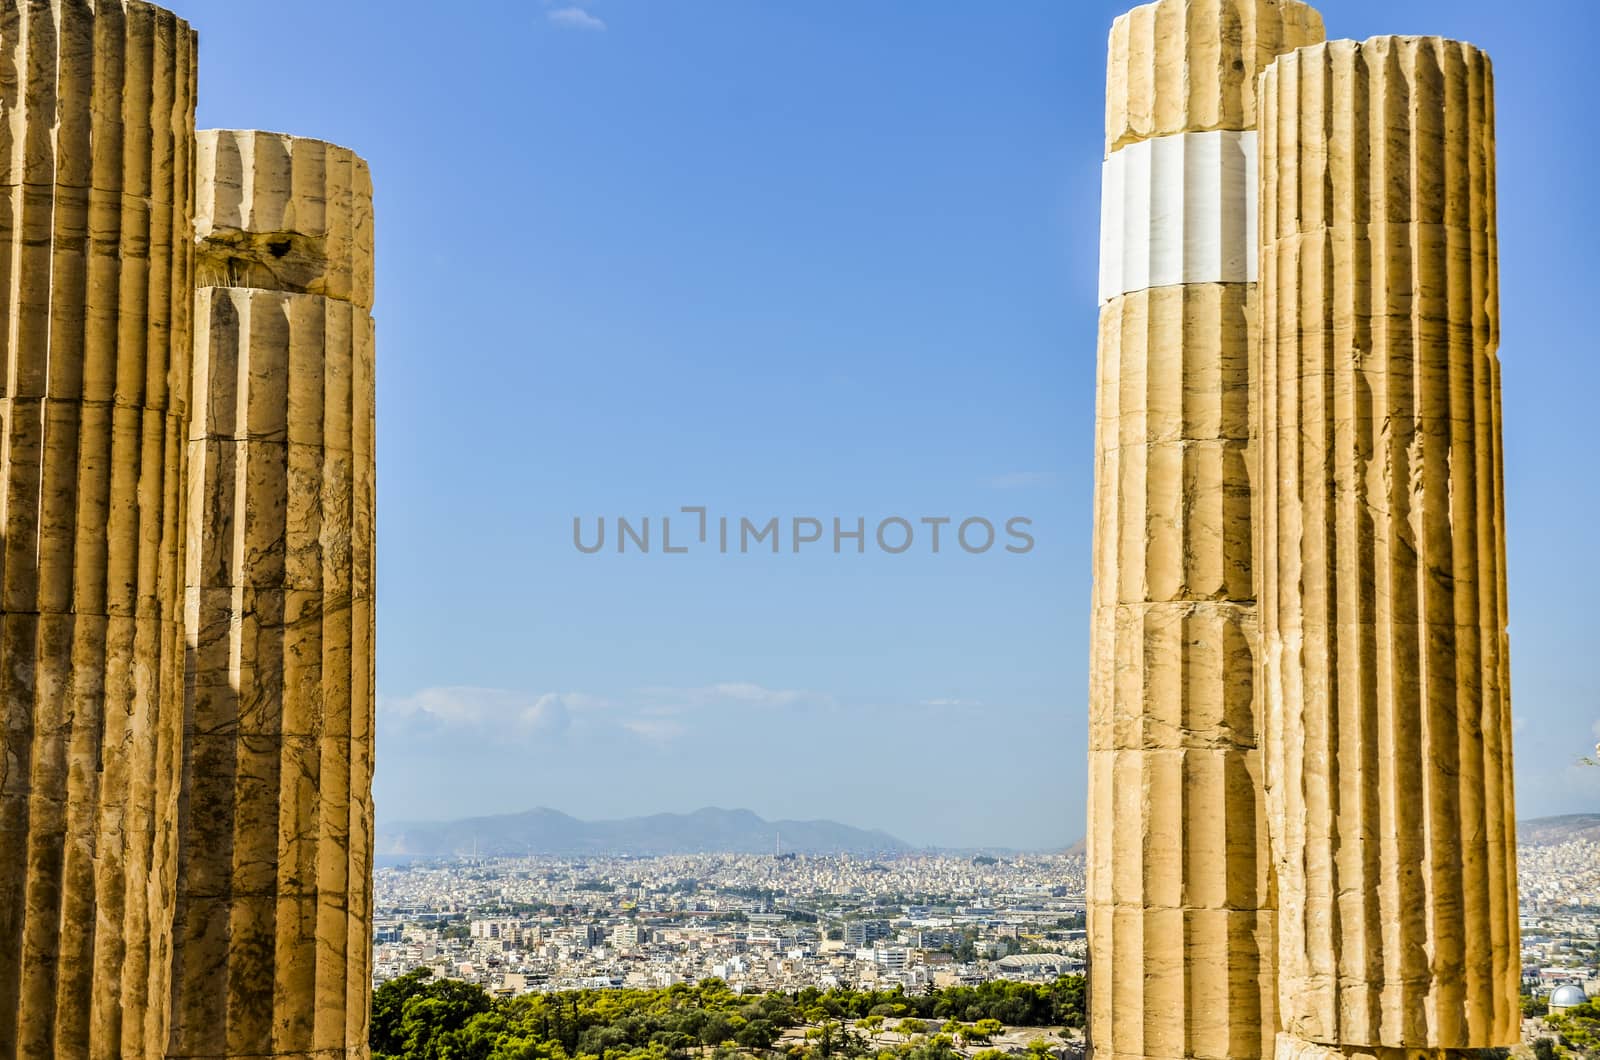 VIEW OF THE CITY OF ATHENS BETWEEN COLUMNS FROM THE ACROPOLIS